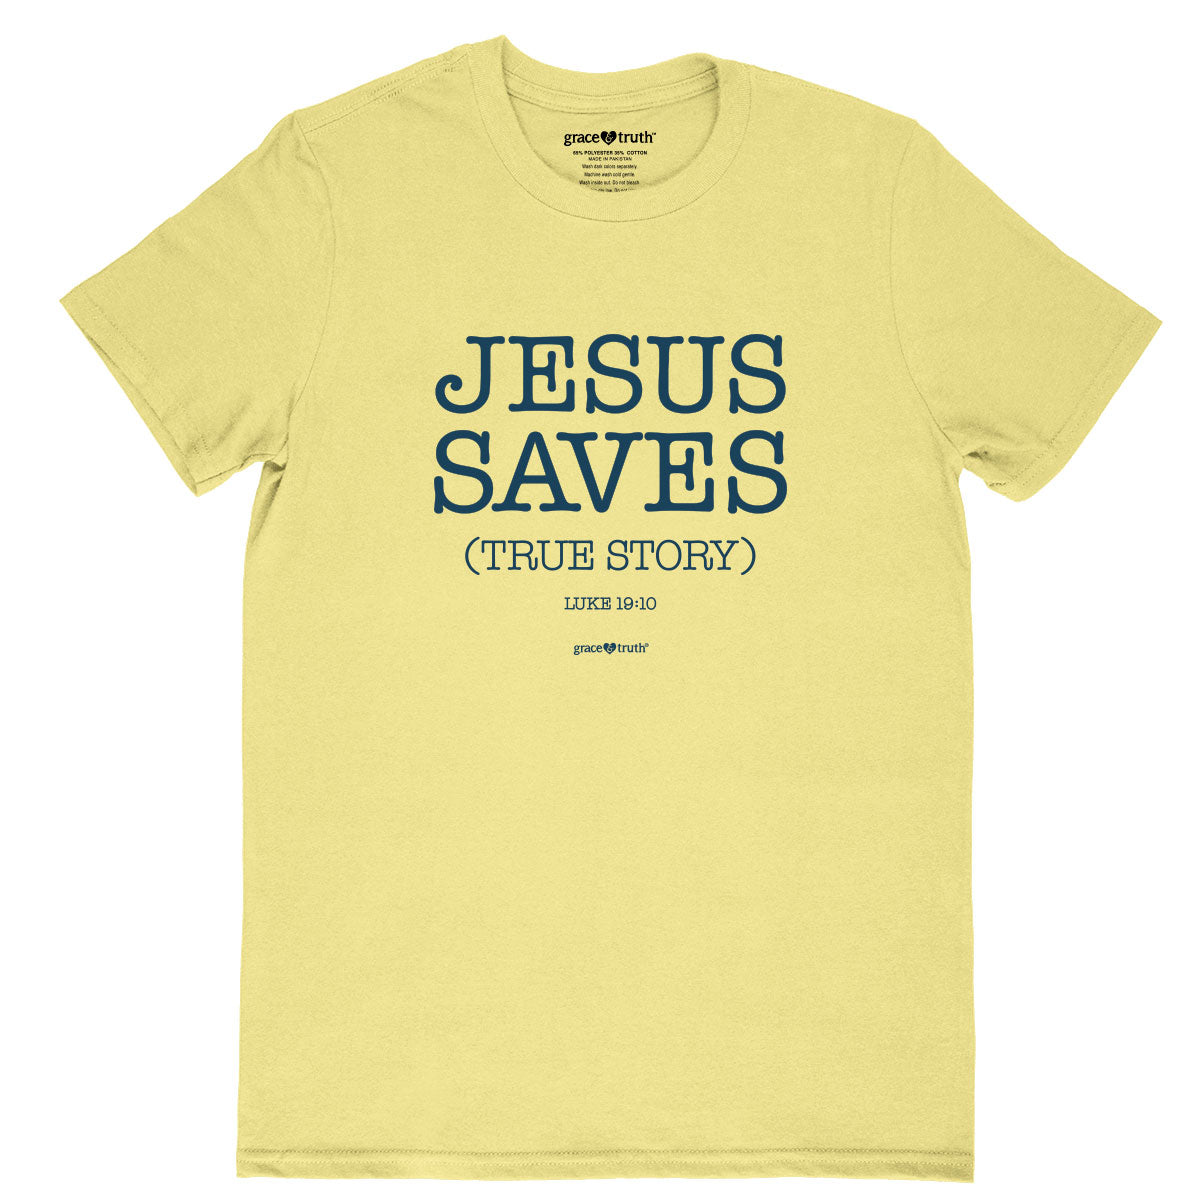 Awesome Christian T-Shirts for Family and Friends ❘ Kerusso – Page 7